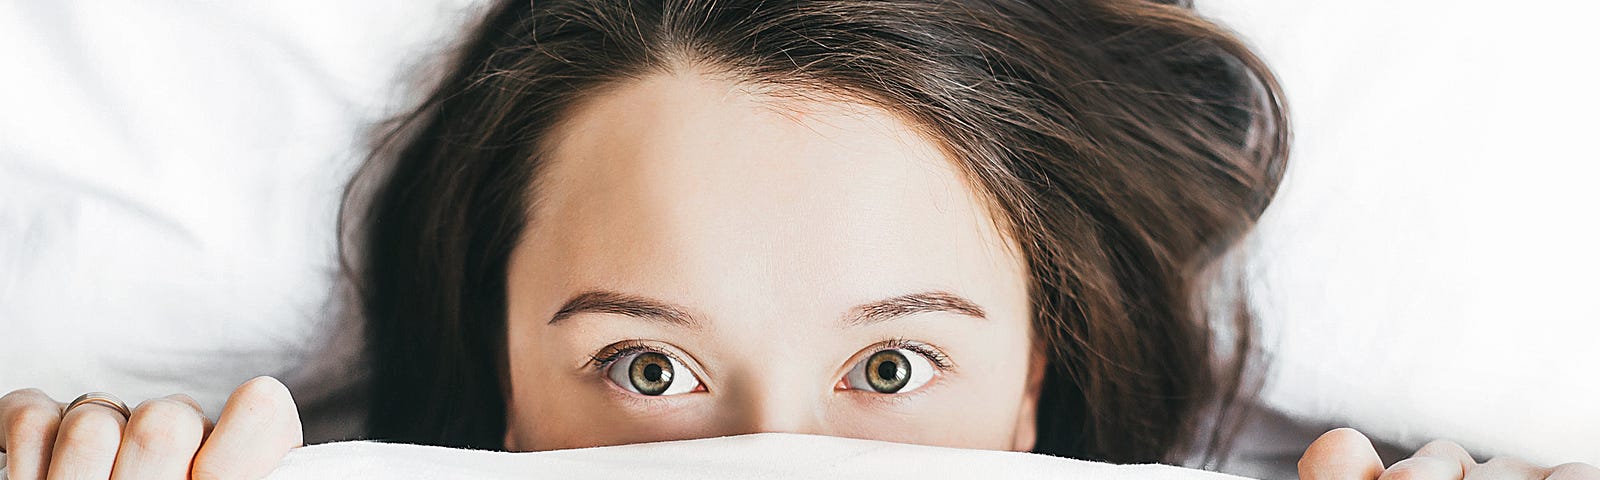 Woman’s eyes peeking out of covers